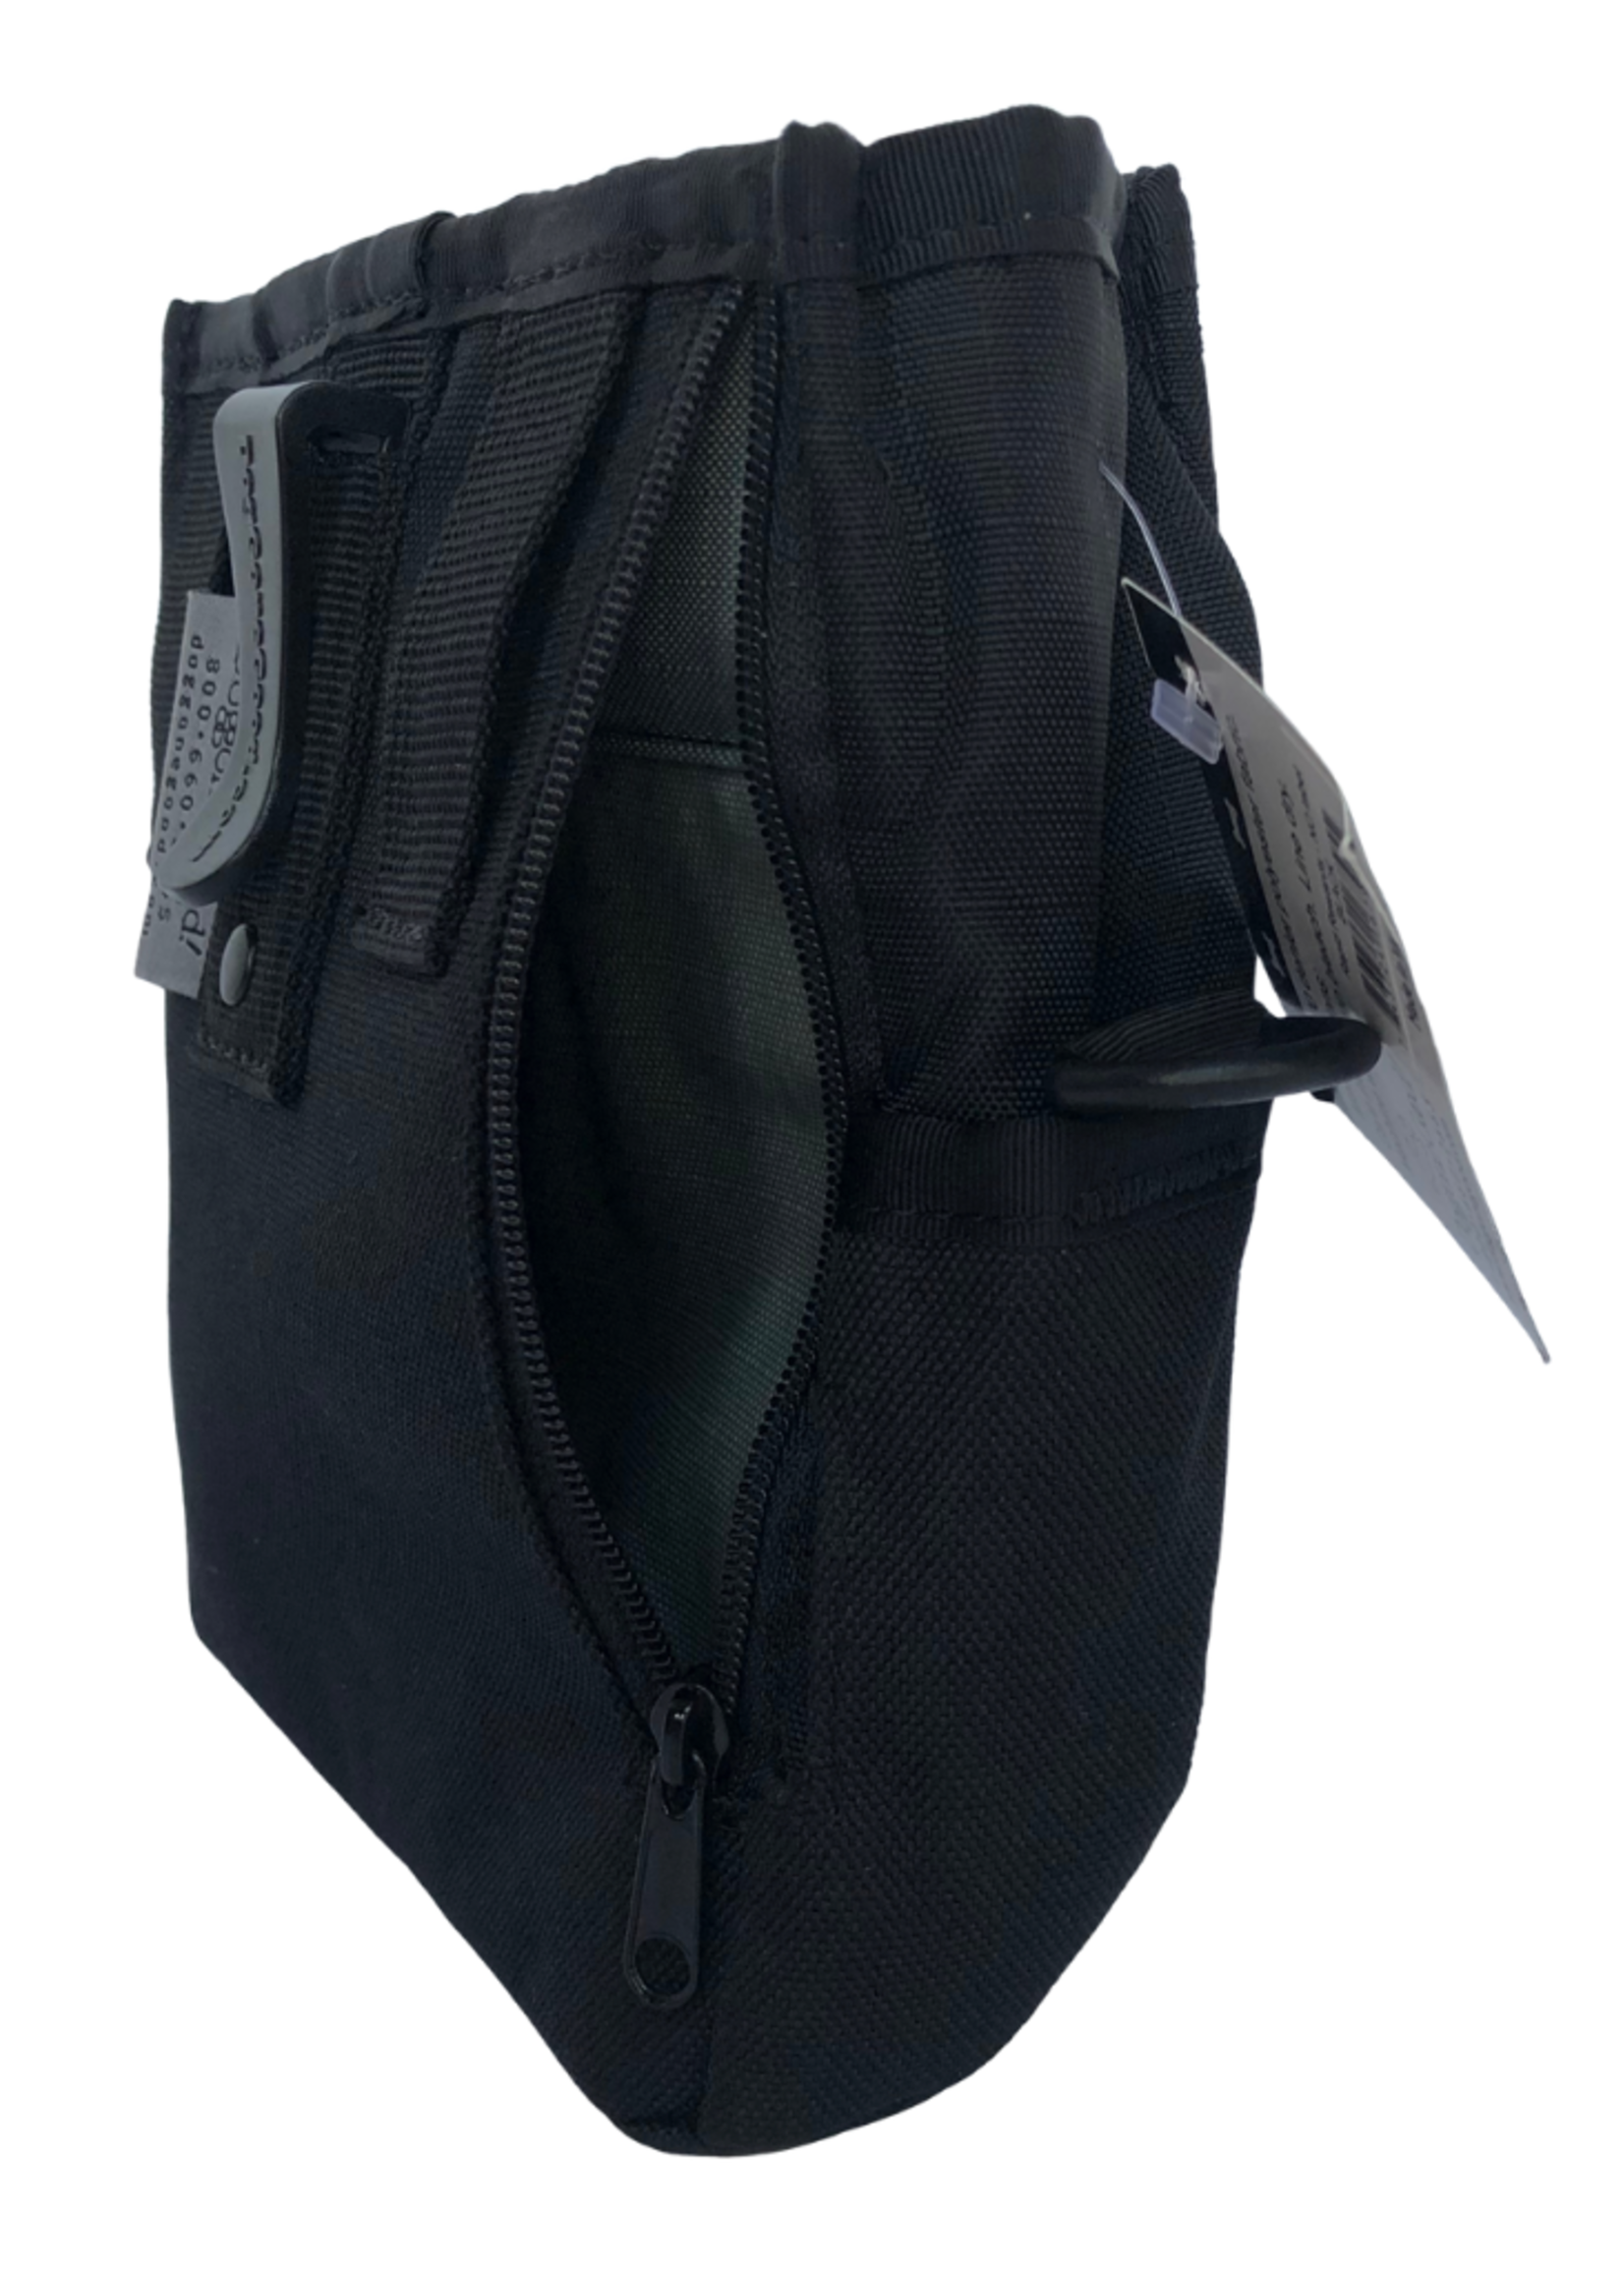 UPK9 Training Pouch and Strap